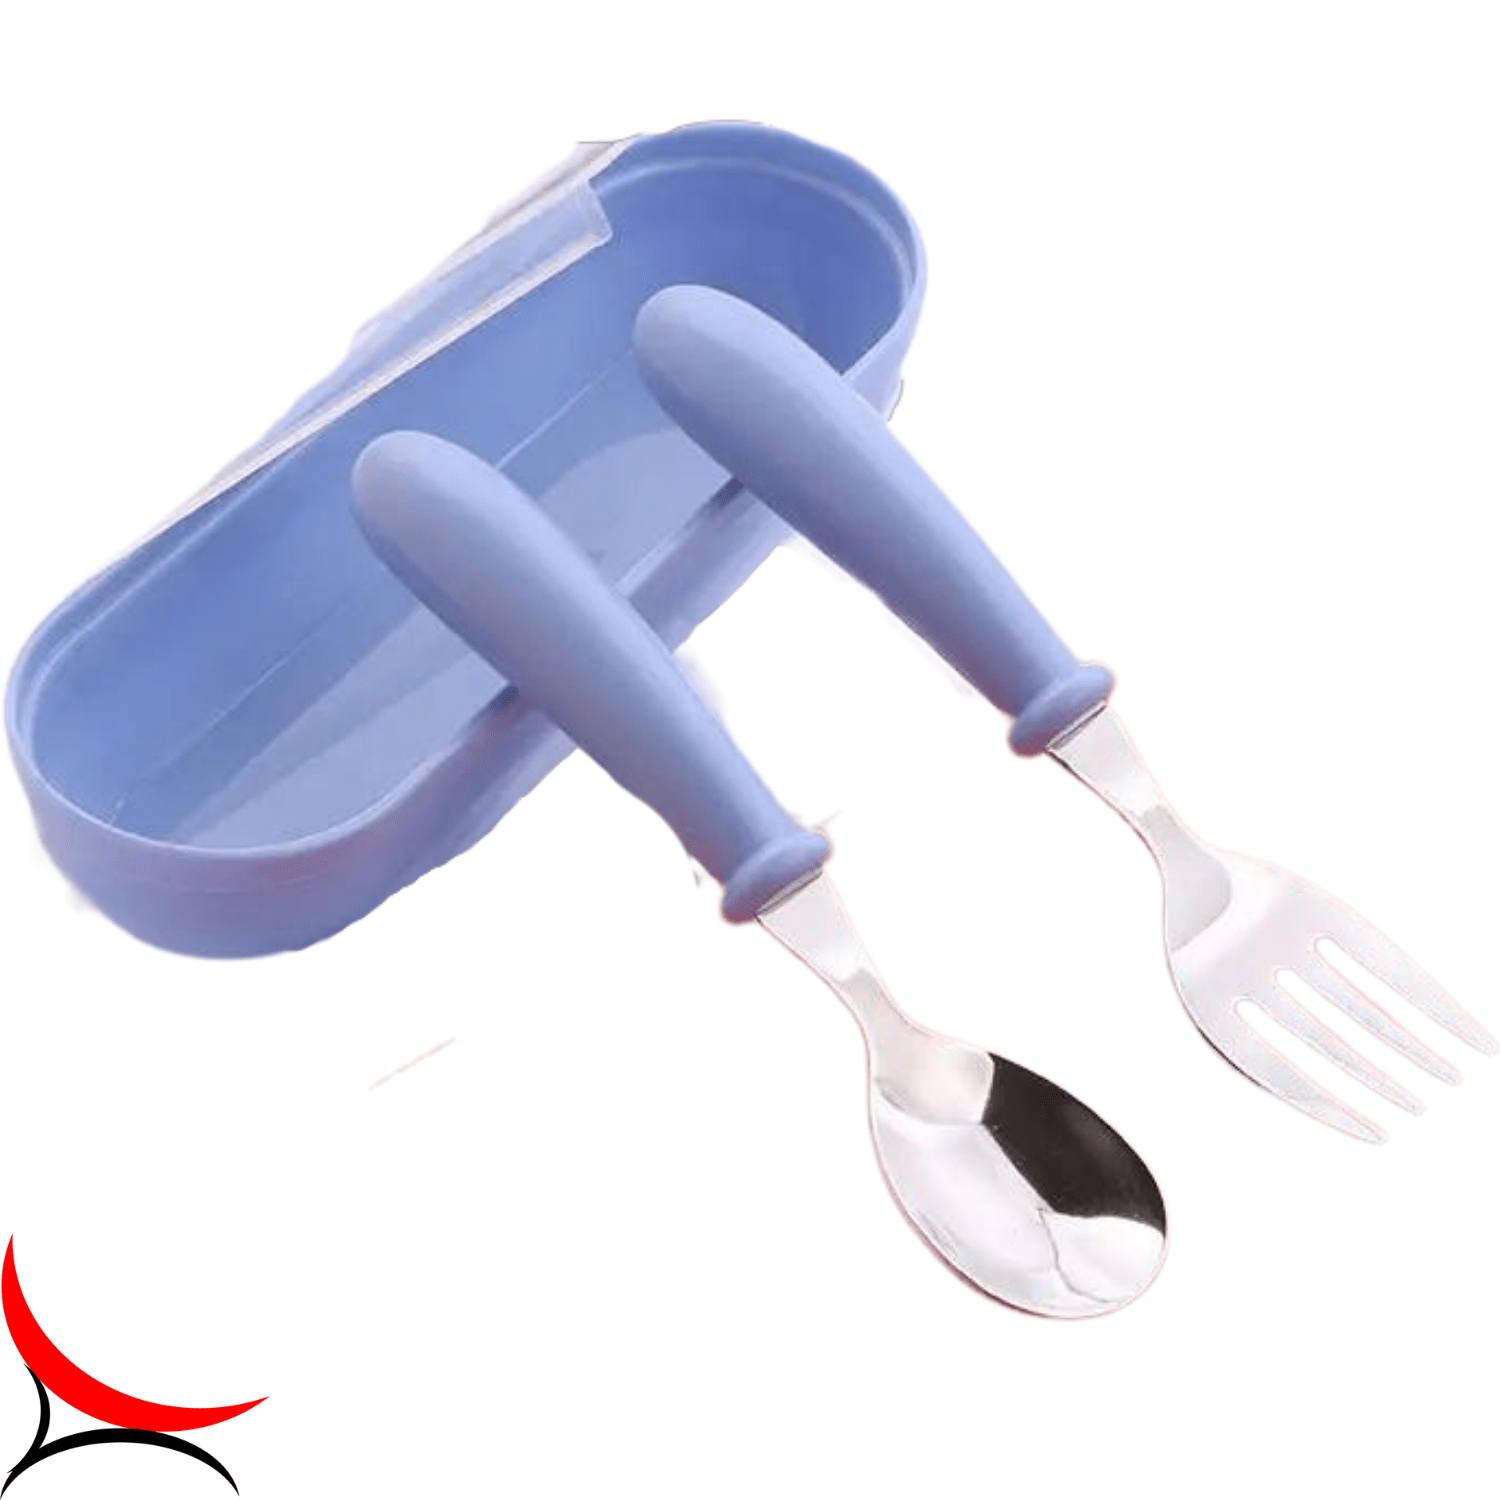 Ergonomic Curved Toddler Spoons